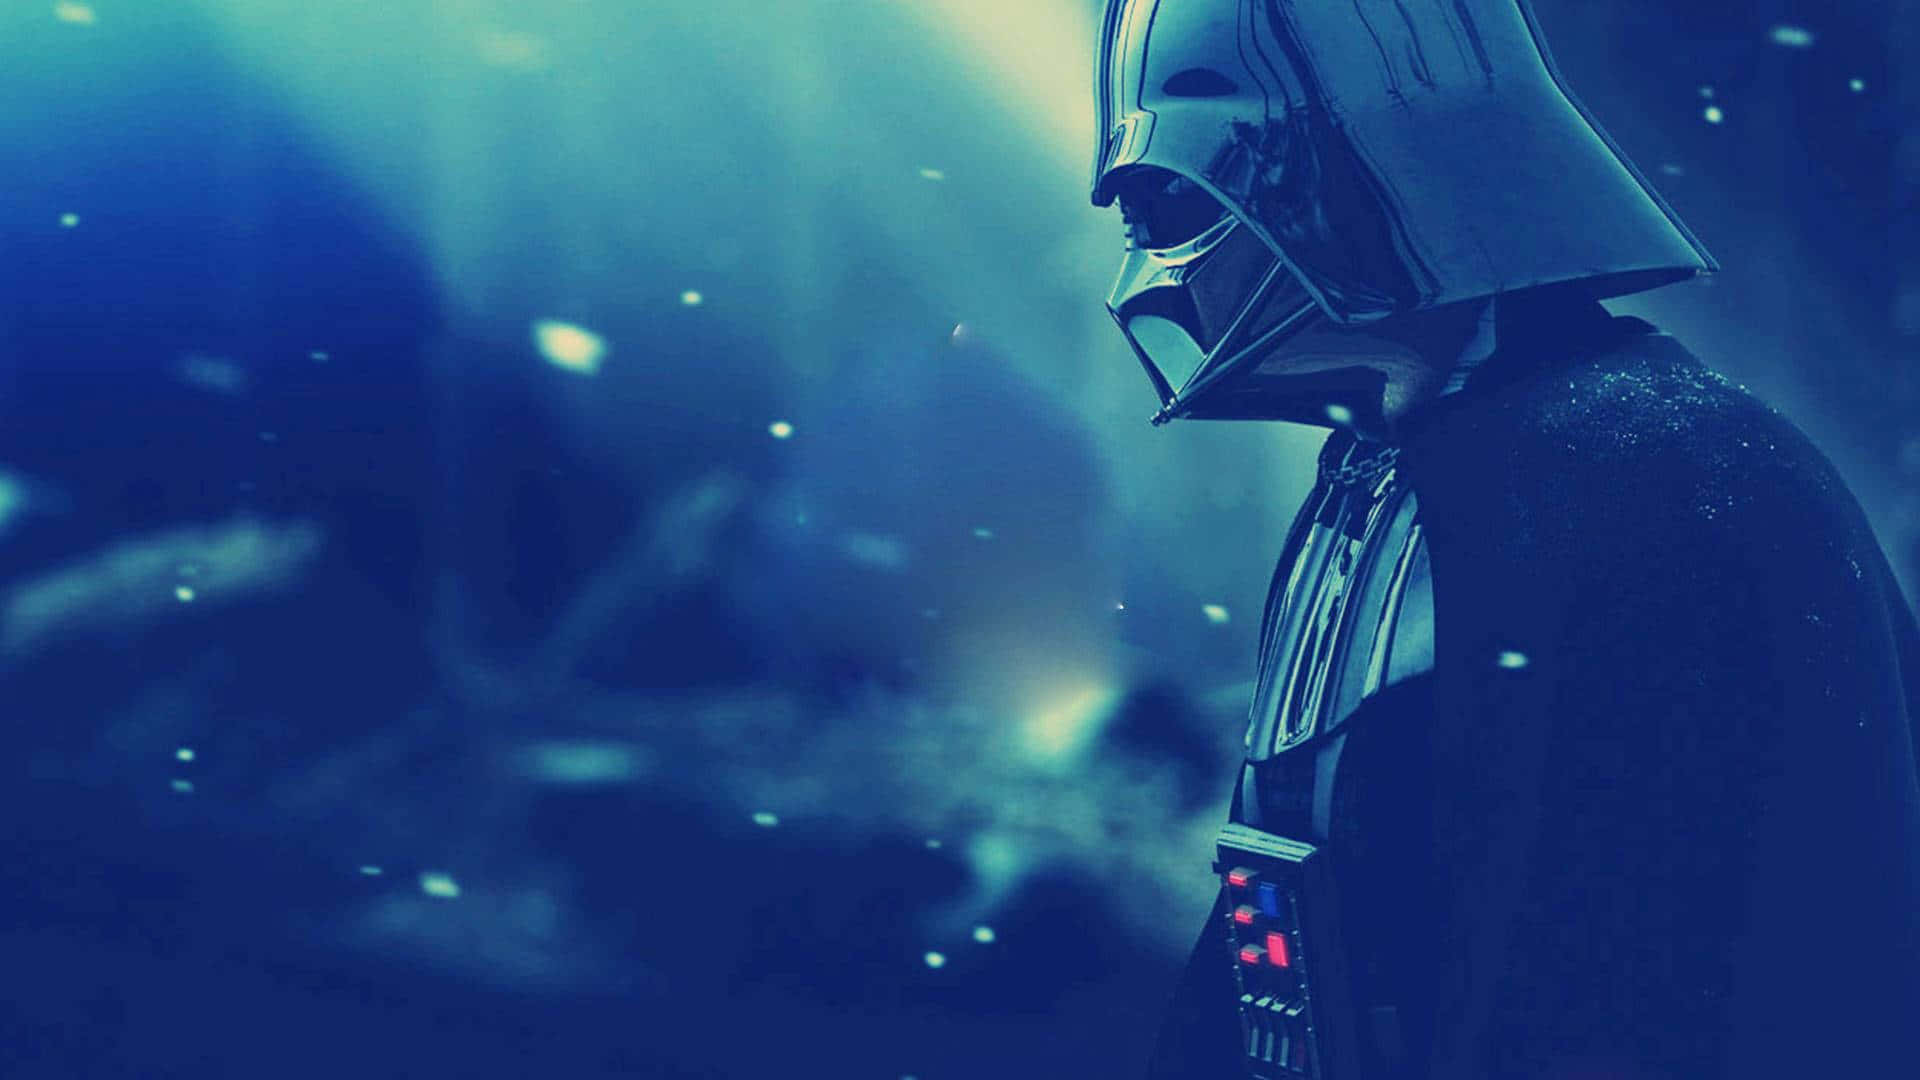 The Ultimate Sith Lord - Darth Vader